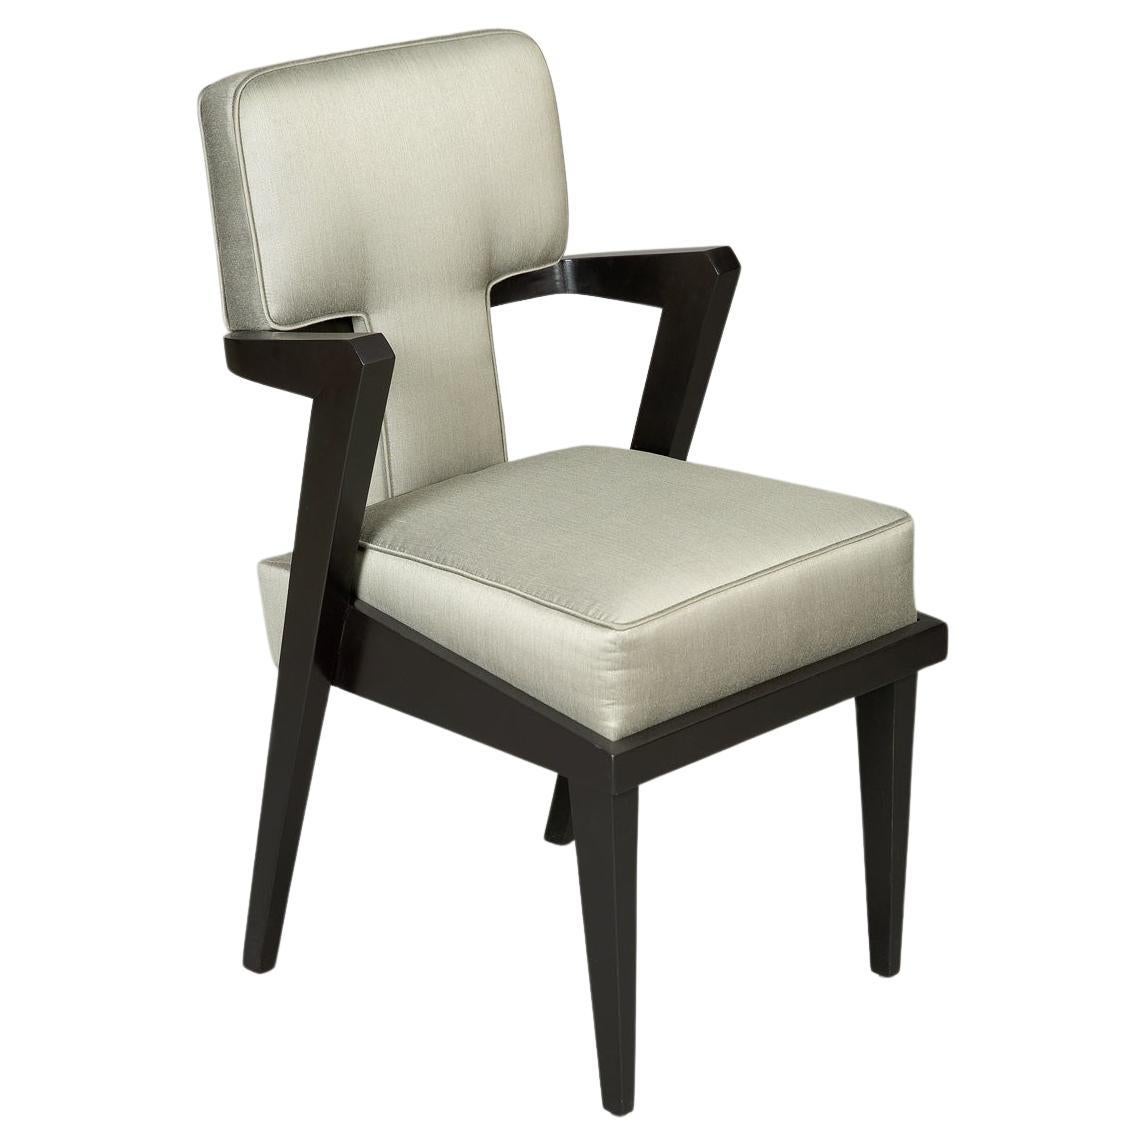 Rhone Arm Chair by Bourgeois Boheme Atelier For Sale